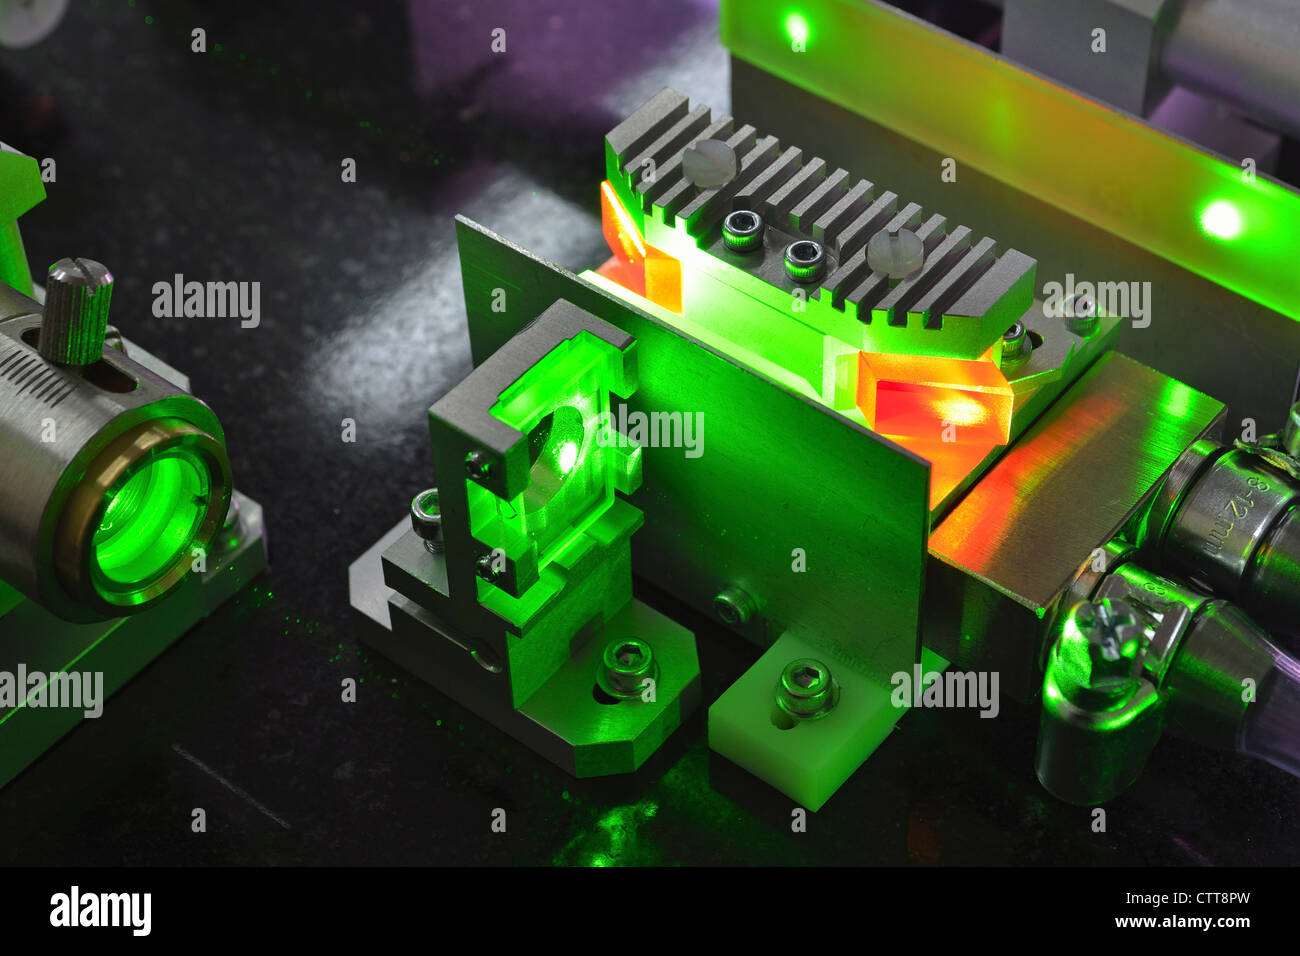 active elements of powerful Ti:Sapphire laser pumped by green light Stock Photo